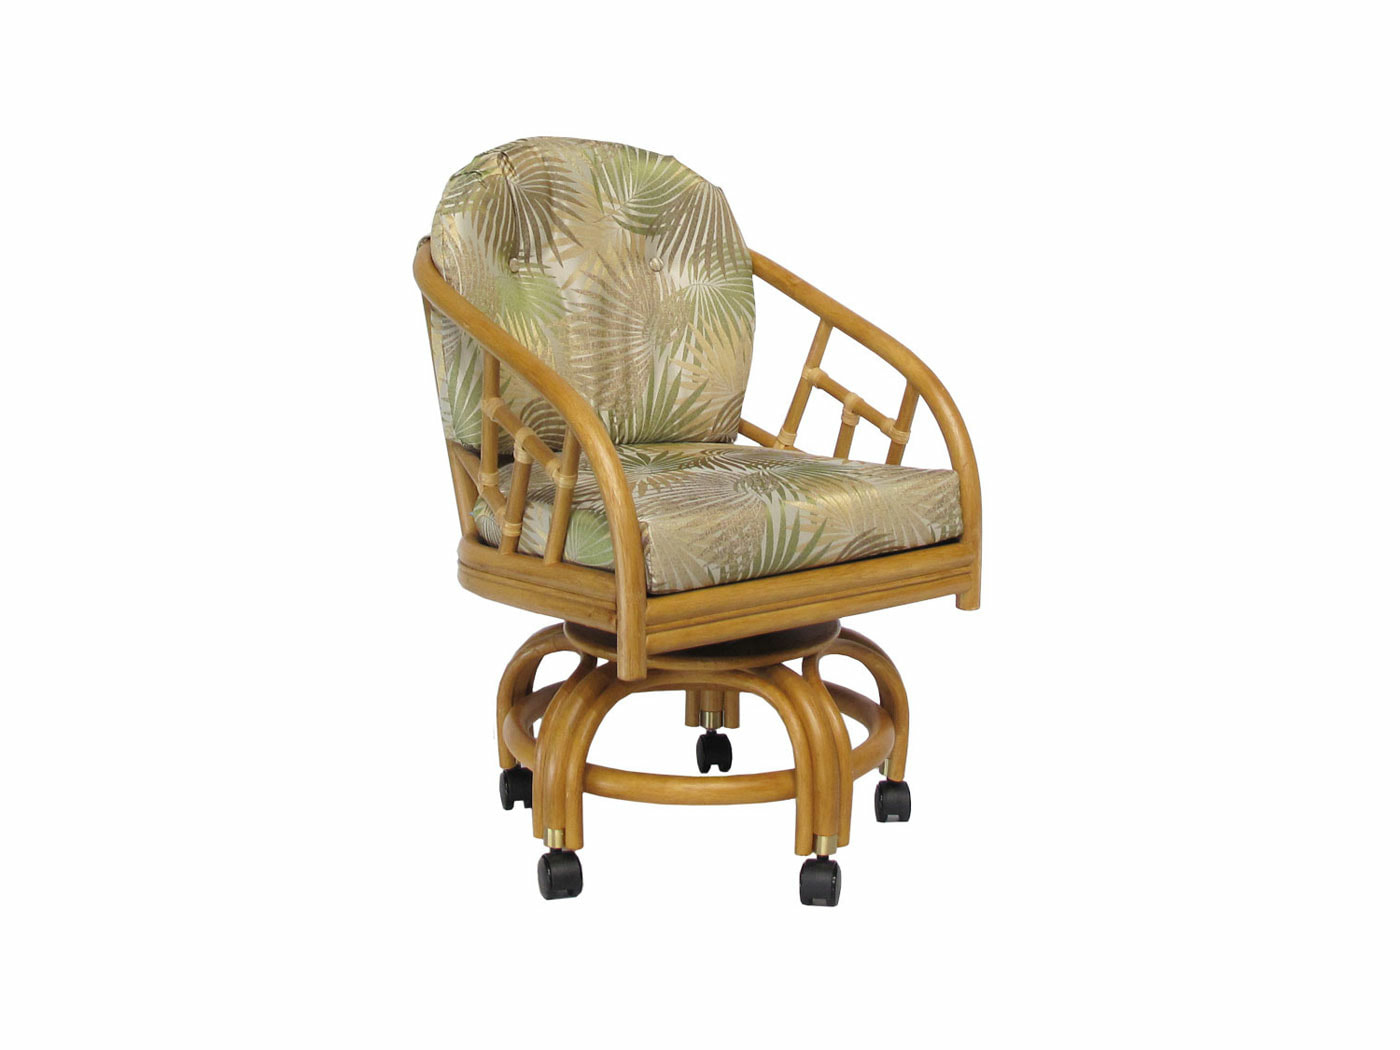 Swivel Caster Dining Chair Replacement, Swivel Rattan Chairs With Cushions